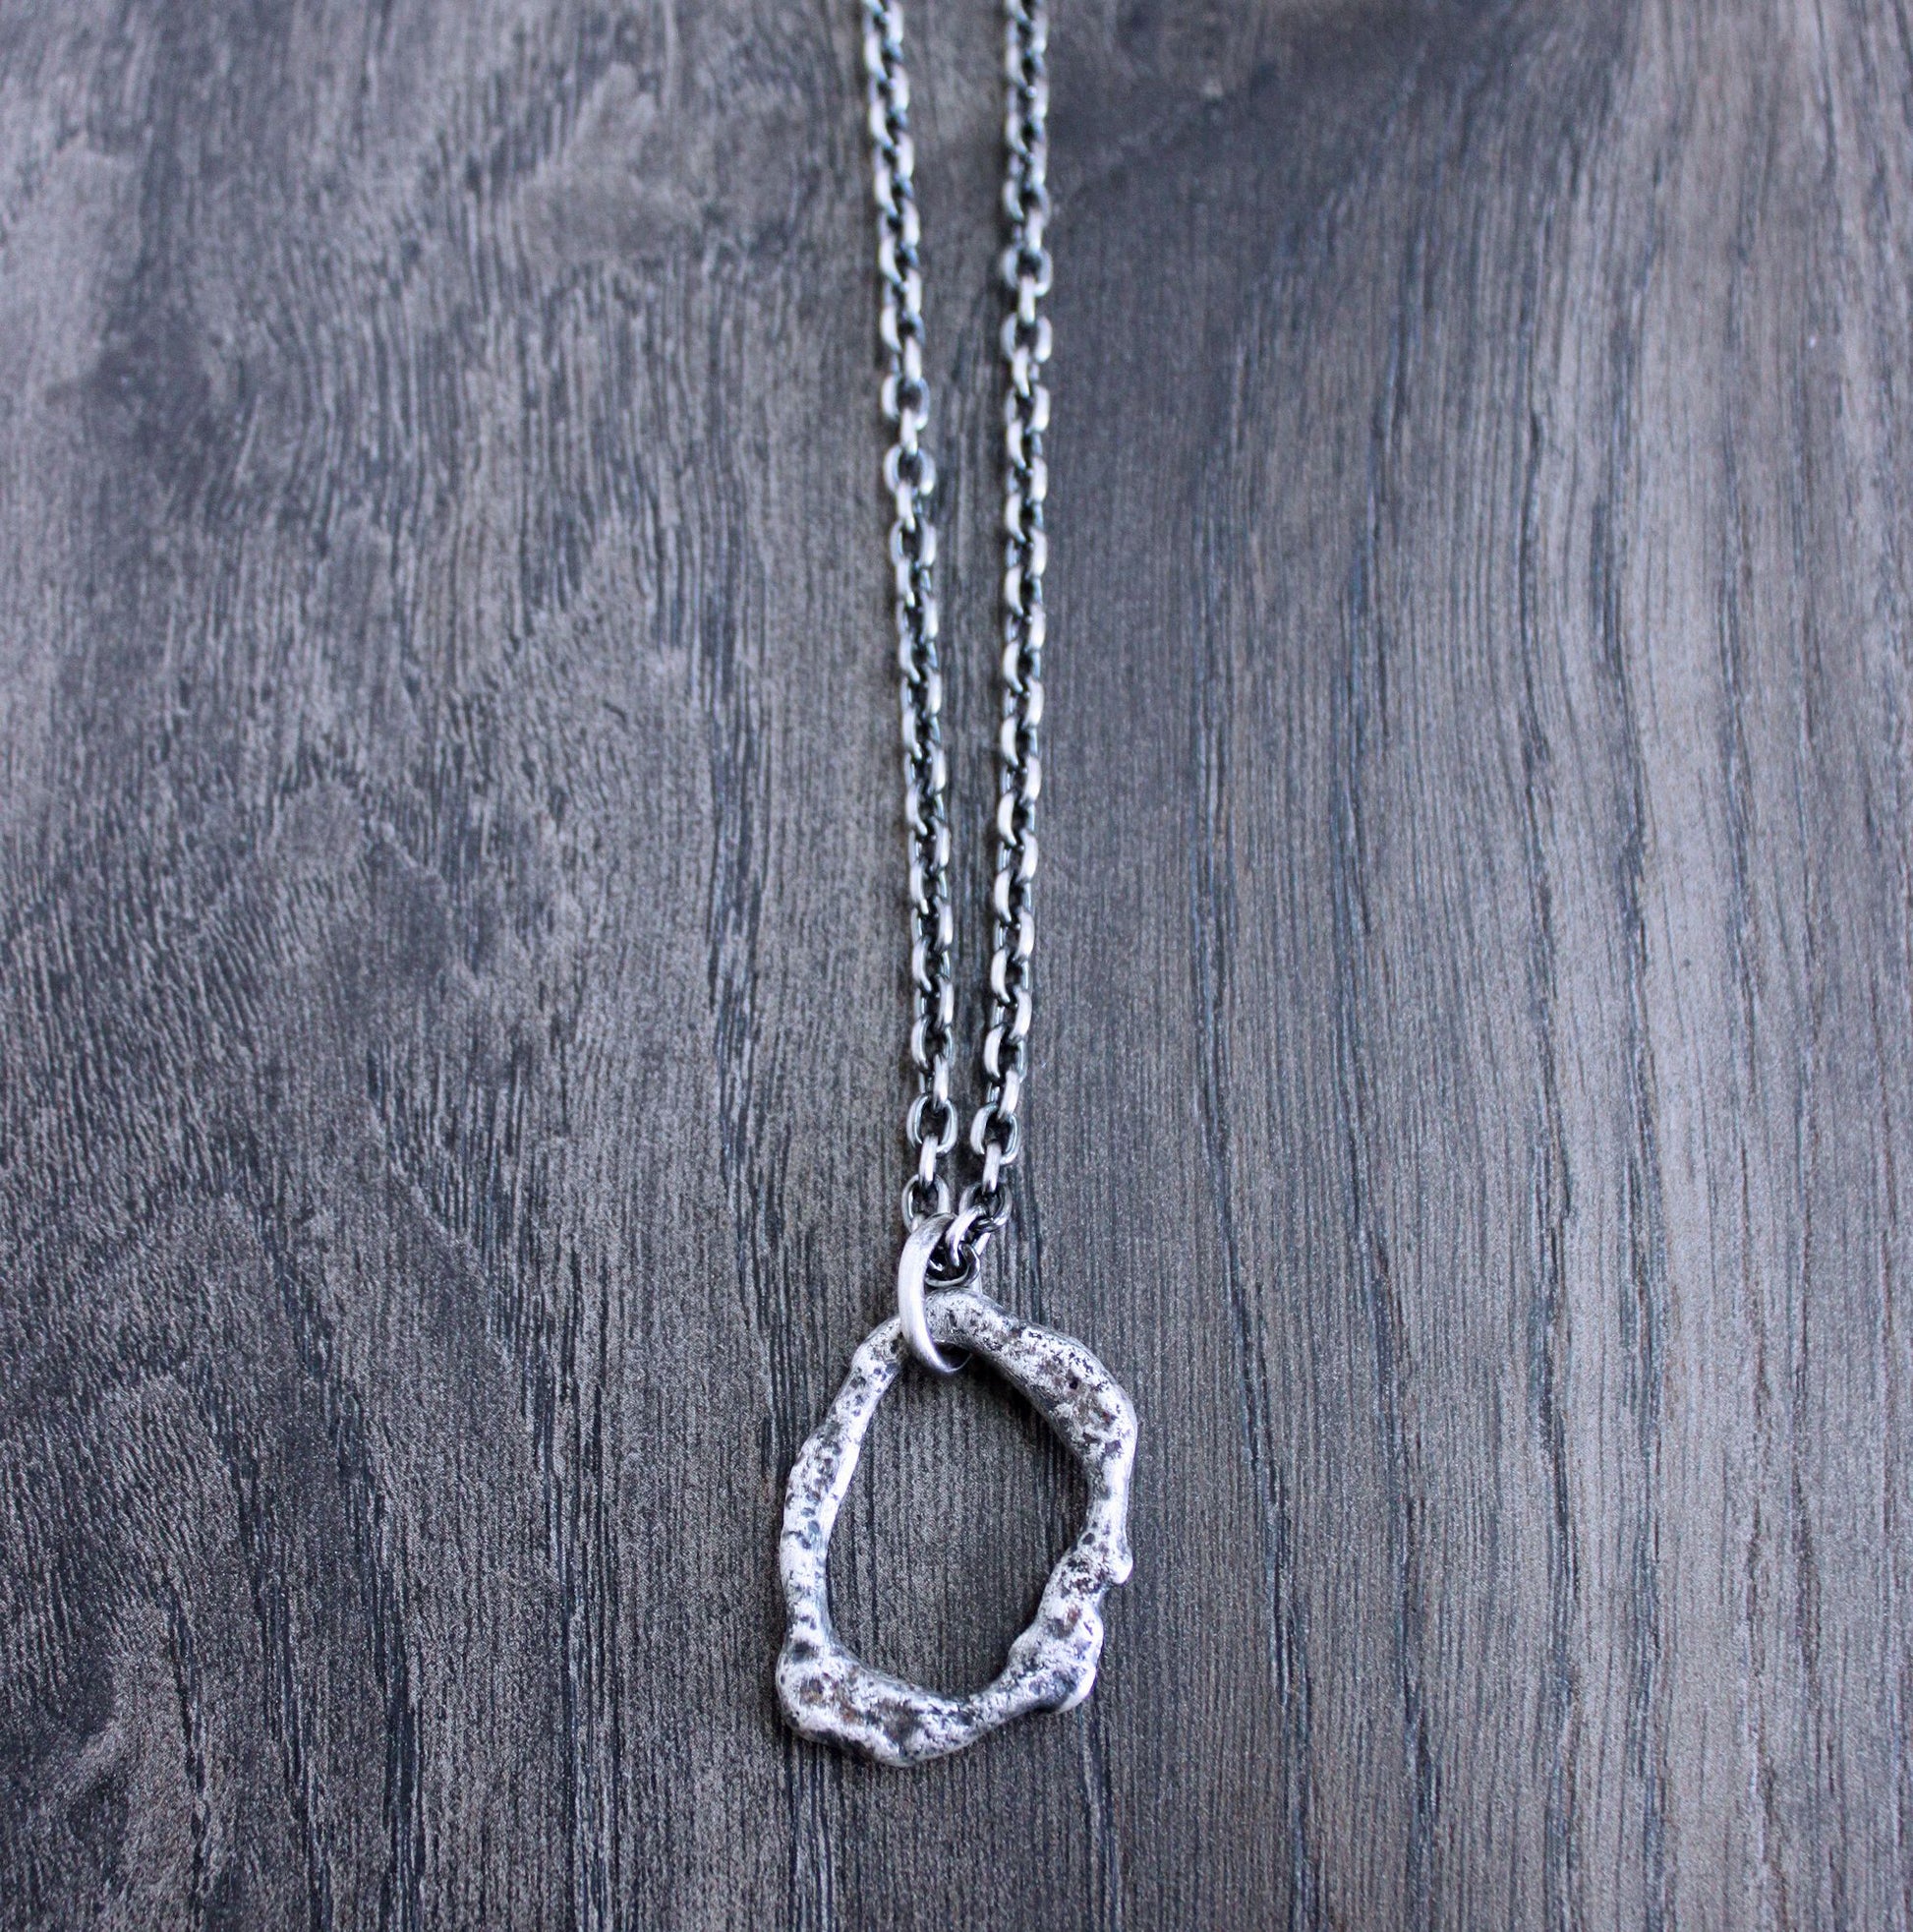 Men's Rugged Silver Pendant Necklace